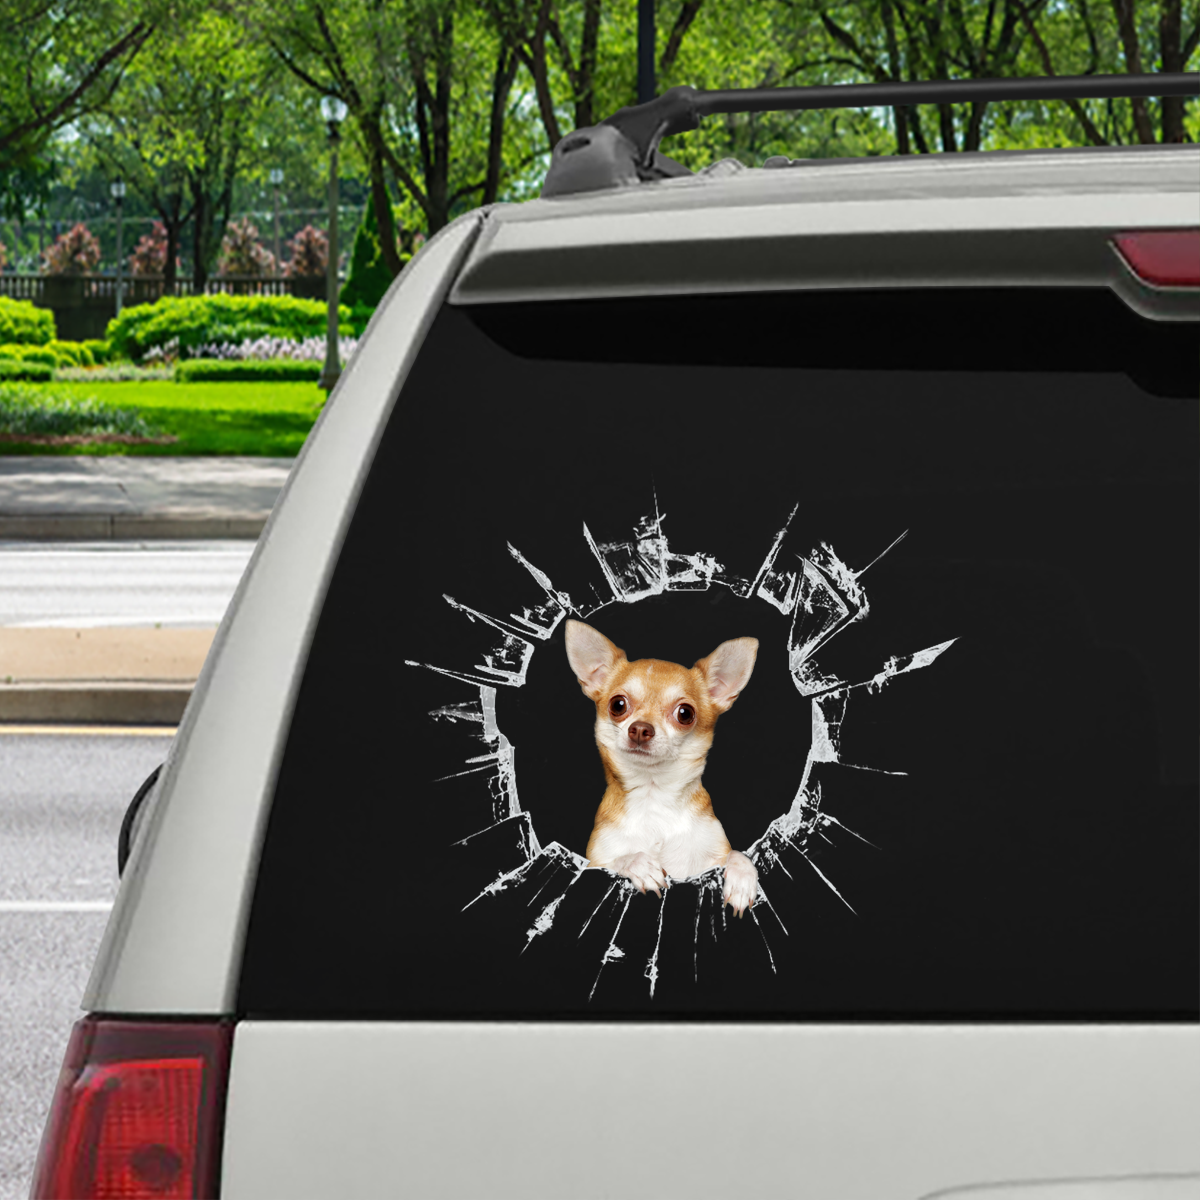 Get In - It's Time For Shopping - Chihuahua Car Sticker V2